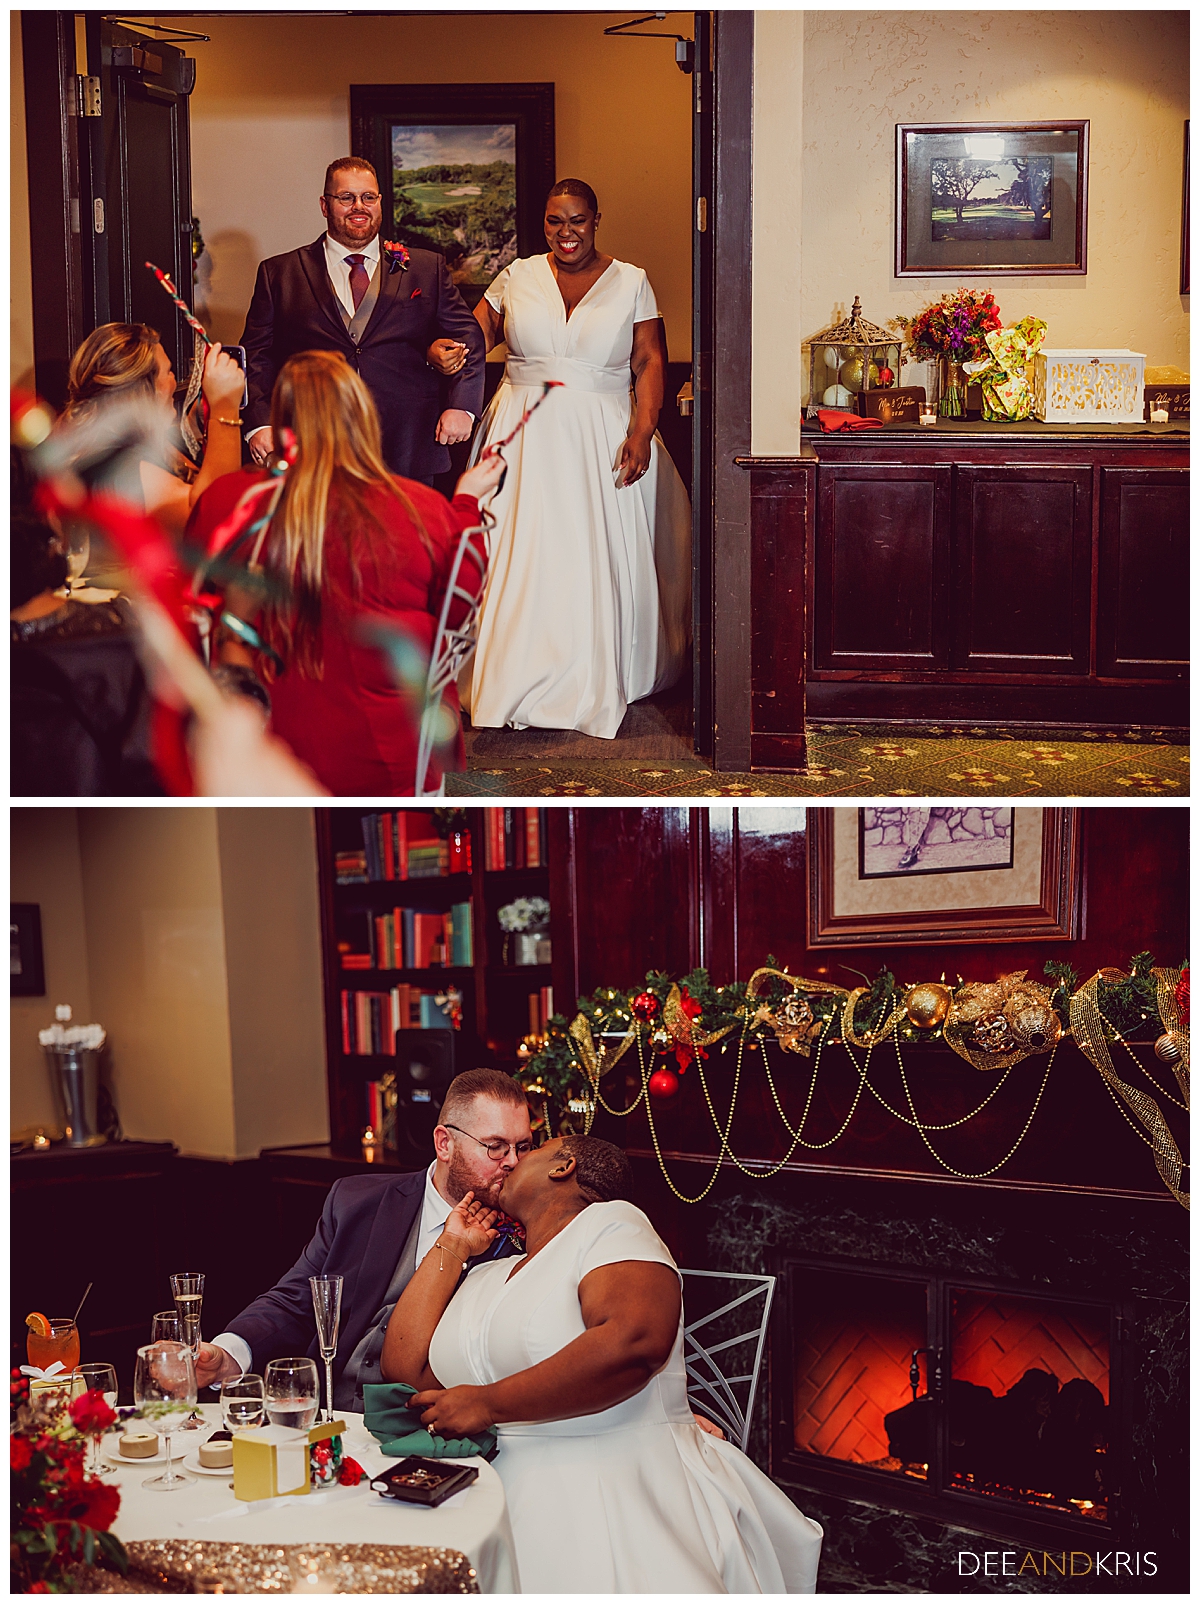 Two images: Top image of couples grand entrance. Bottom image of couple seated in front of fireplace in a kiss.